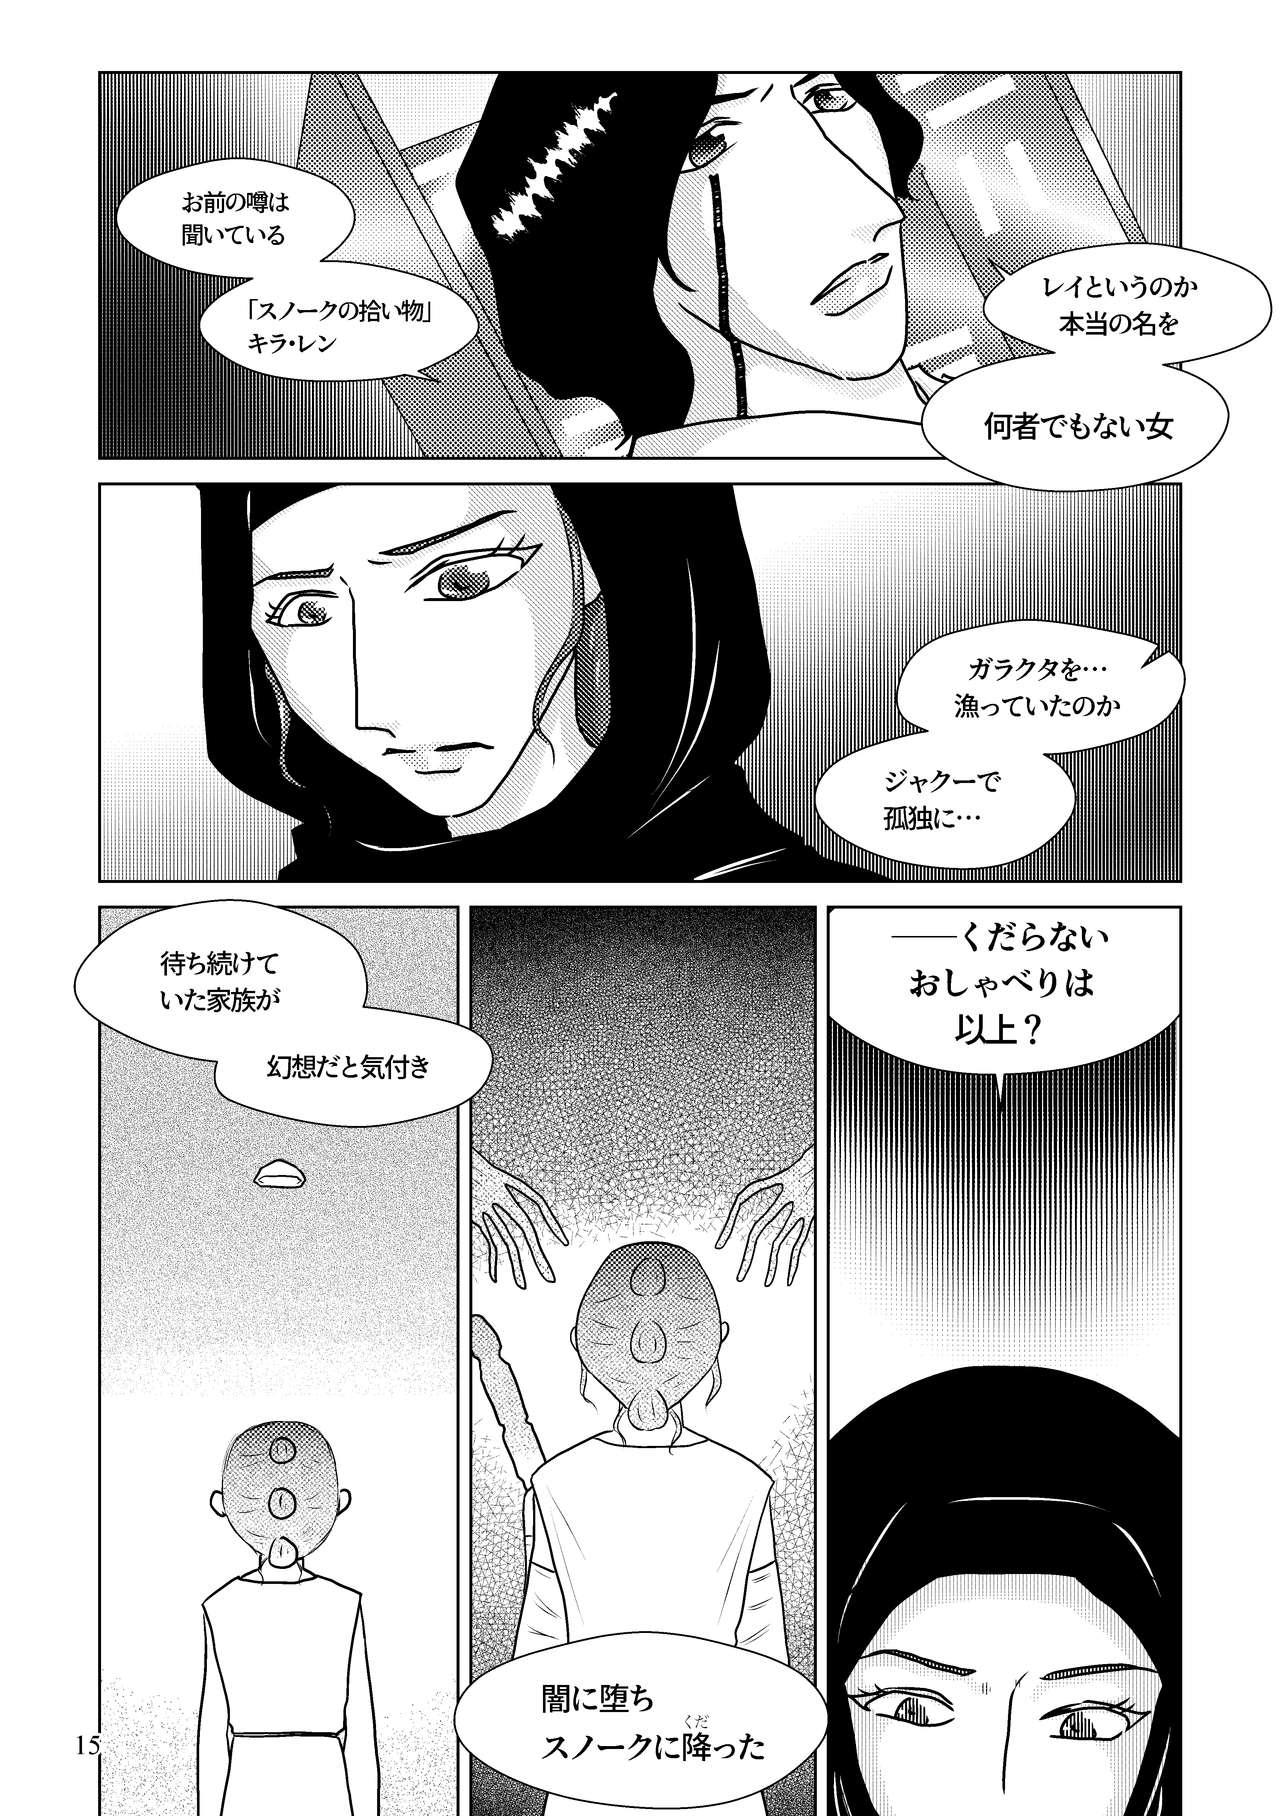 Pussy Orgasm Nothing But You Ch. 1-9 - Star wars Straight - Page 5